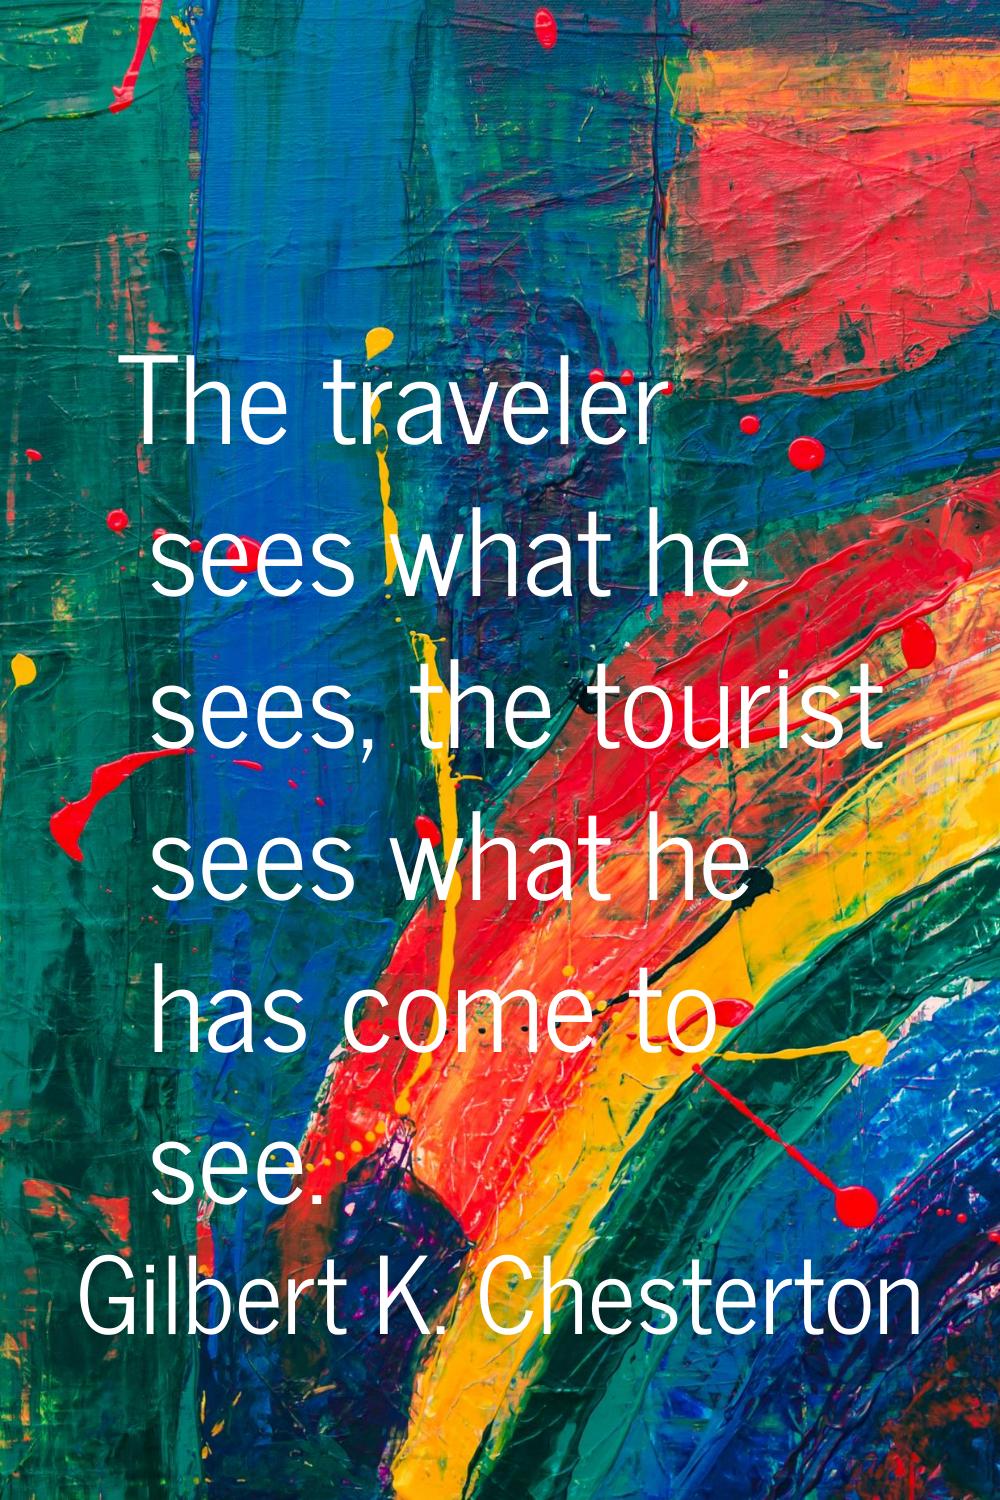 The traveler sees what he sees, the tourist sees what he has come to see.